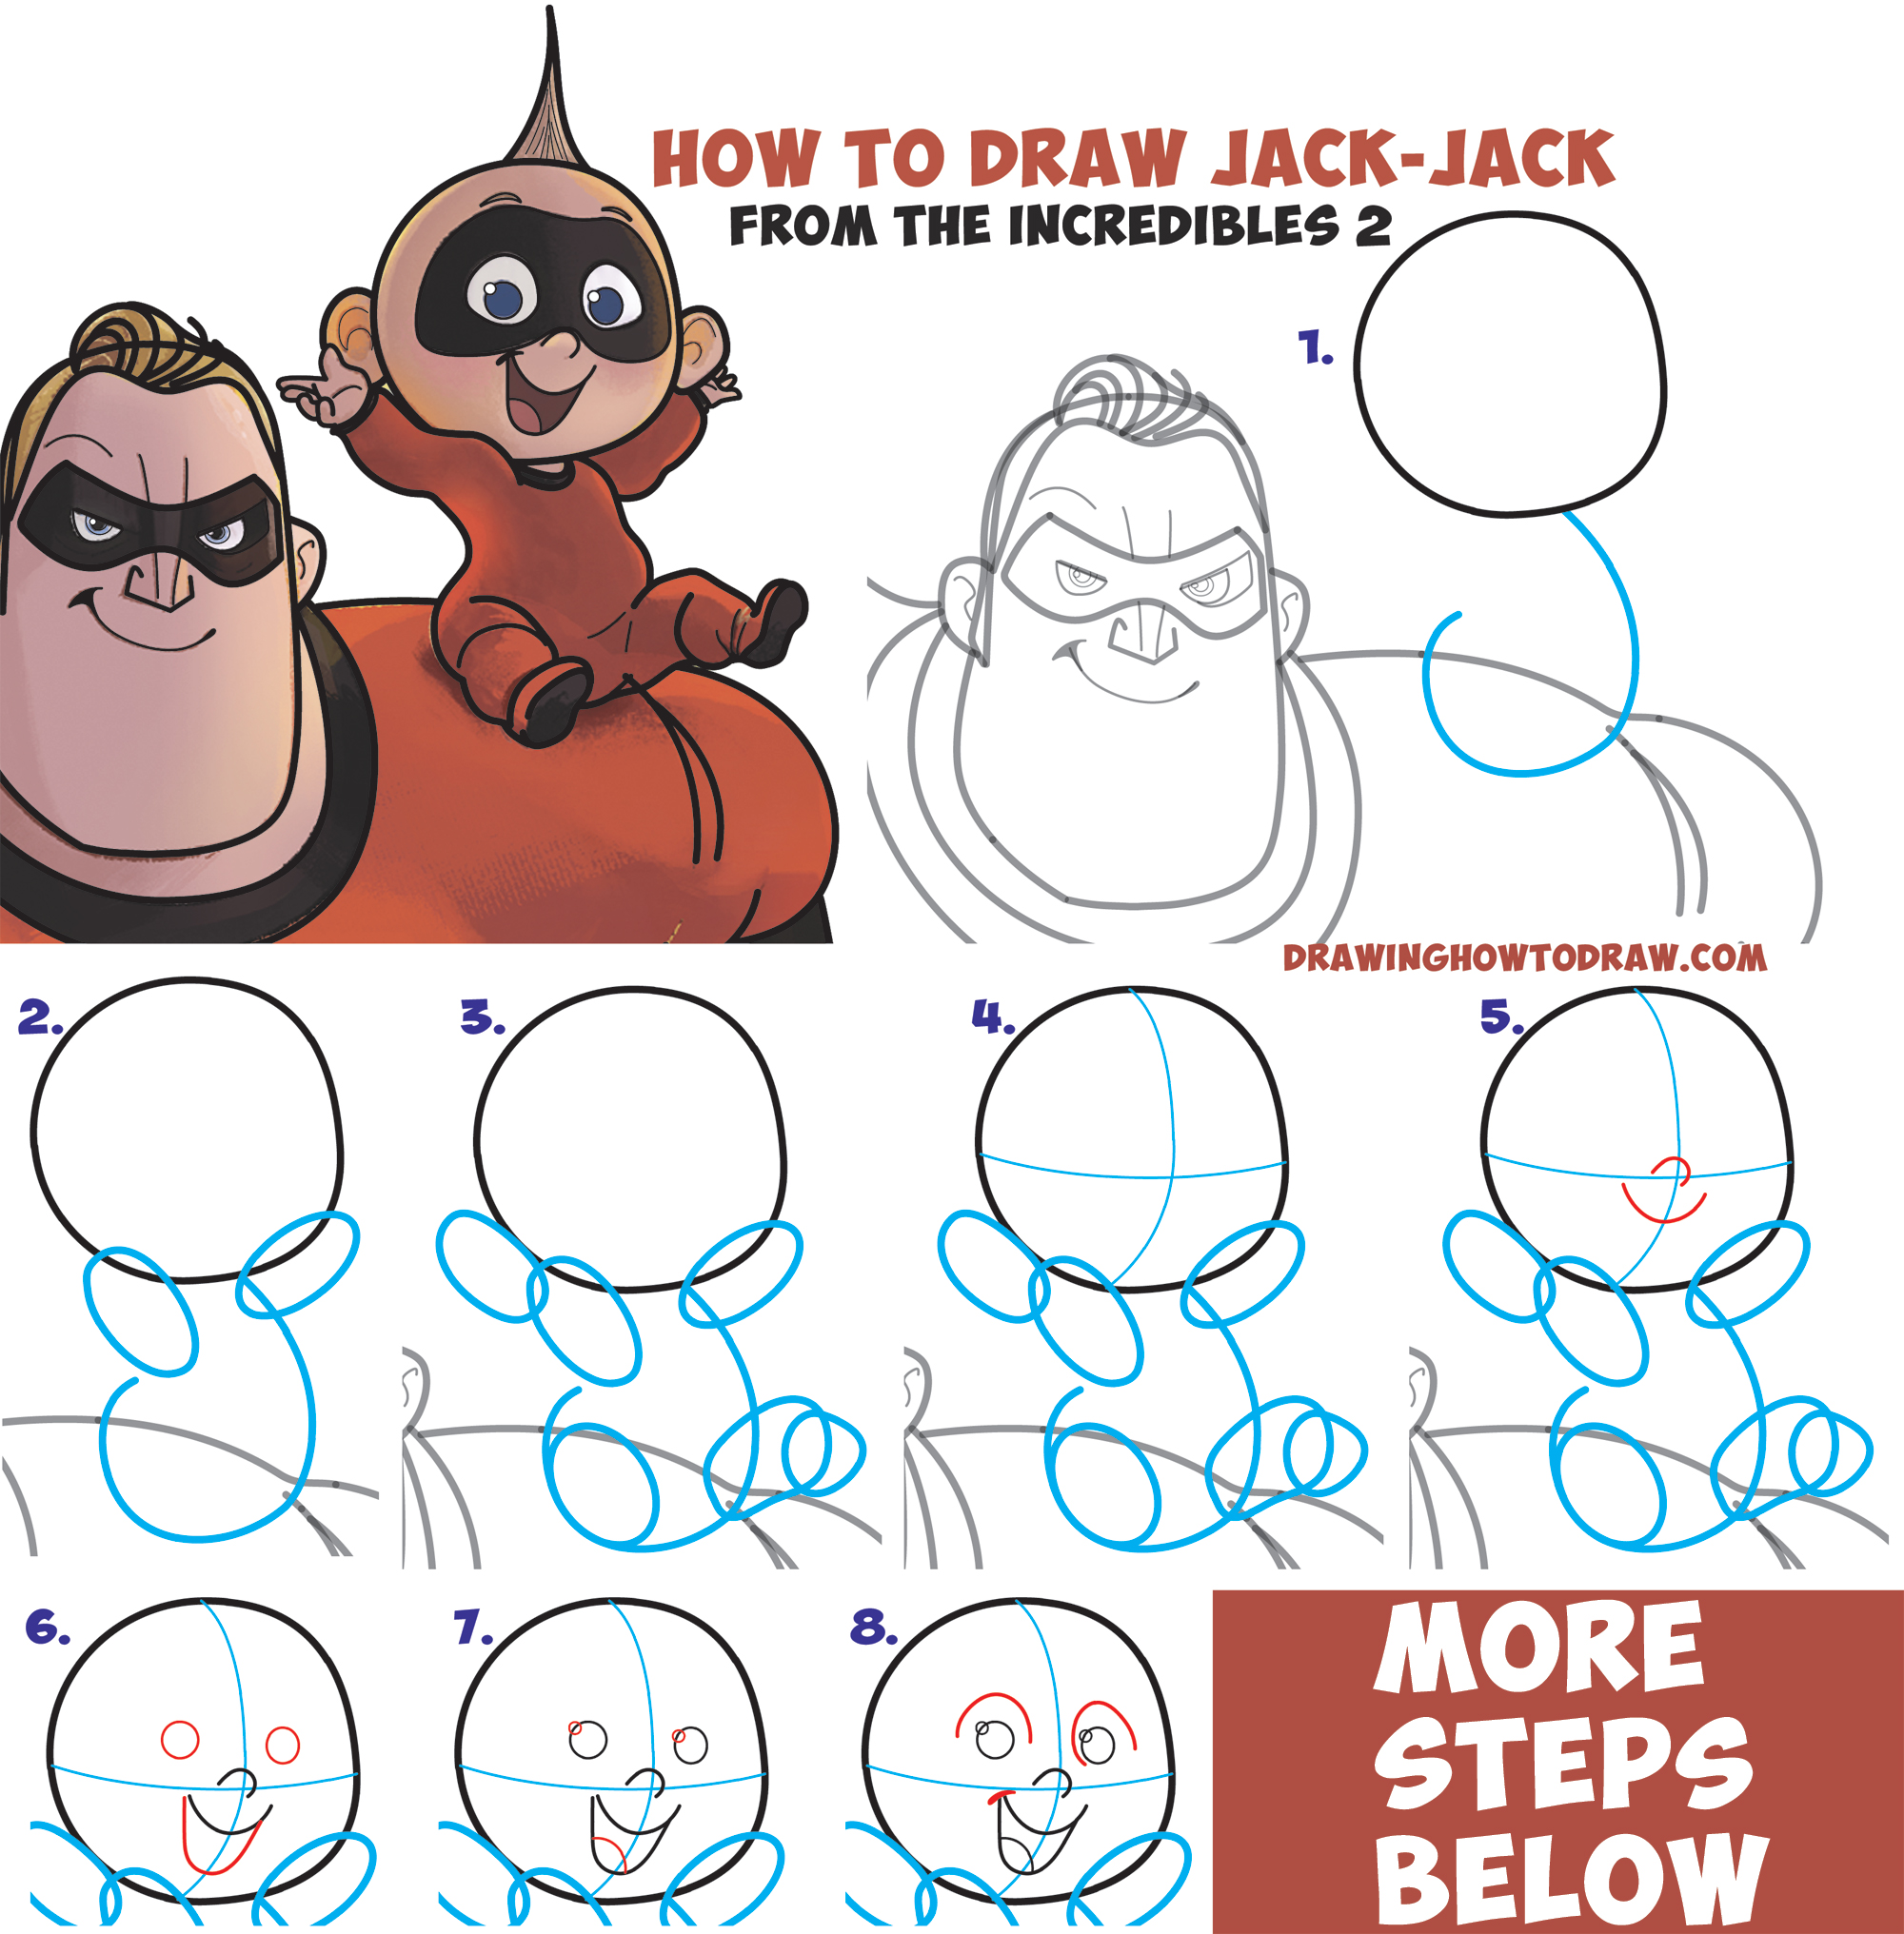 Learn How to Draw Jack Jack the baby from The Incredibles (Part 2 of Drawing The Incredibles 2 Family) Easy Step by Step Tutorial